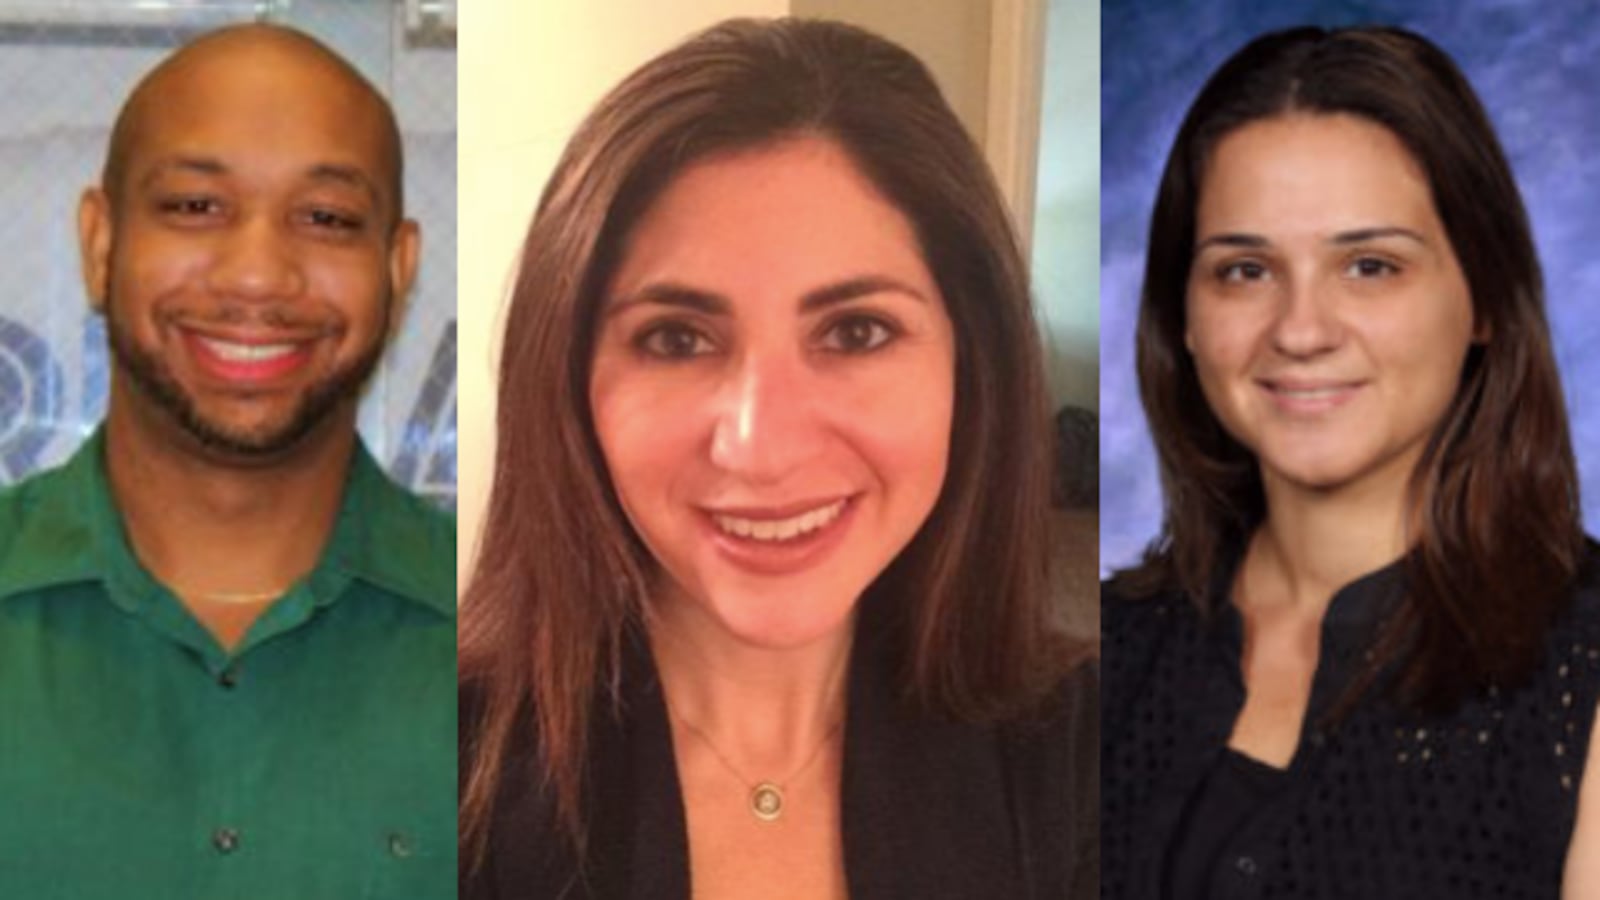 Newark Superintendent Roger León has filled open principal positions for the upcoming year with mostly internal hires. From left: Kyle Brown, Amy Panitch, and Rose Monteiro-Inacio.